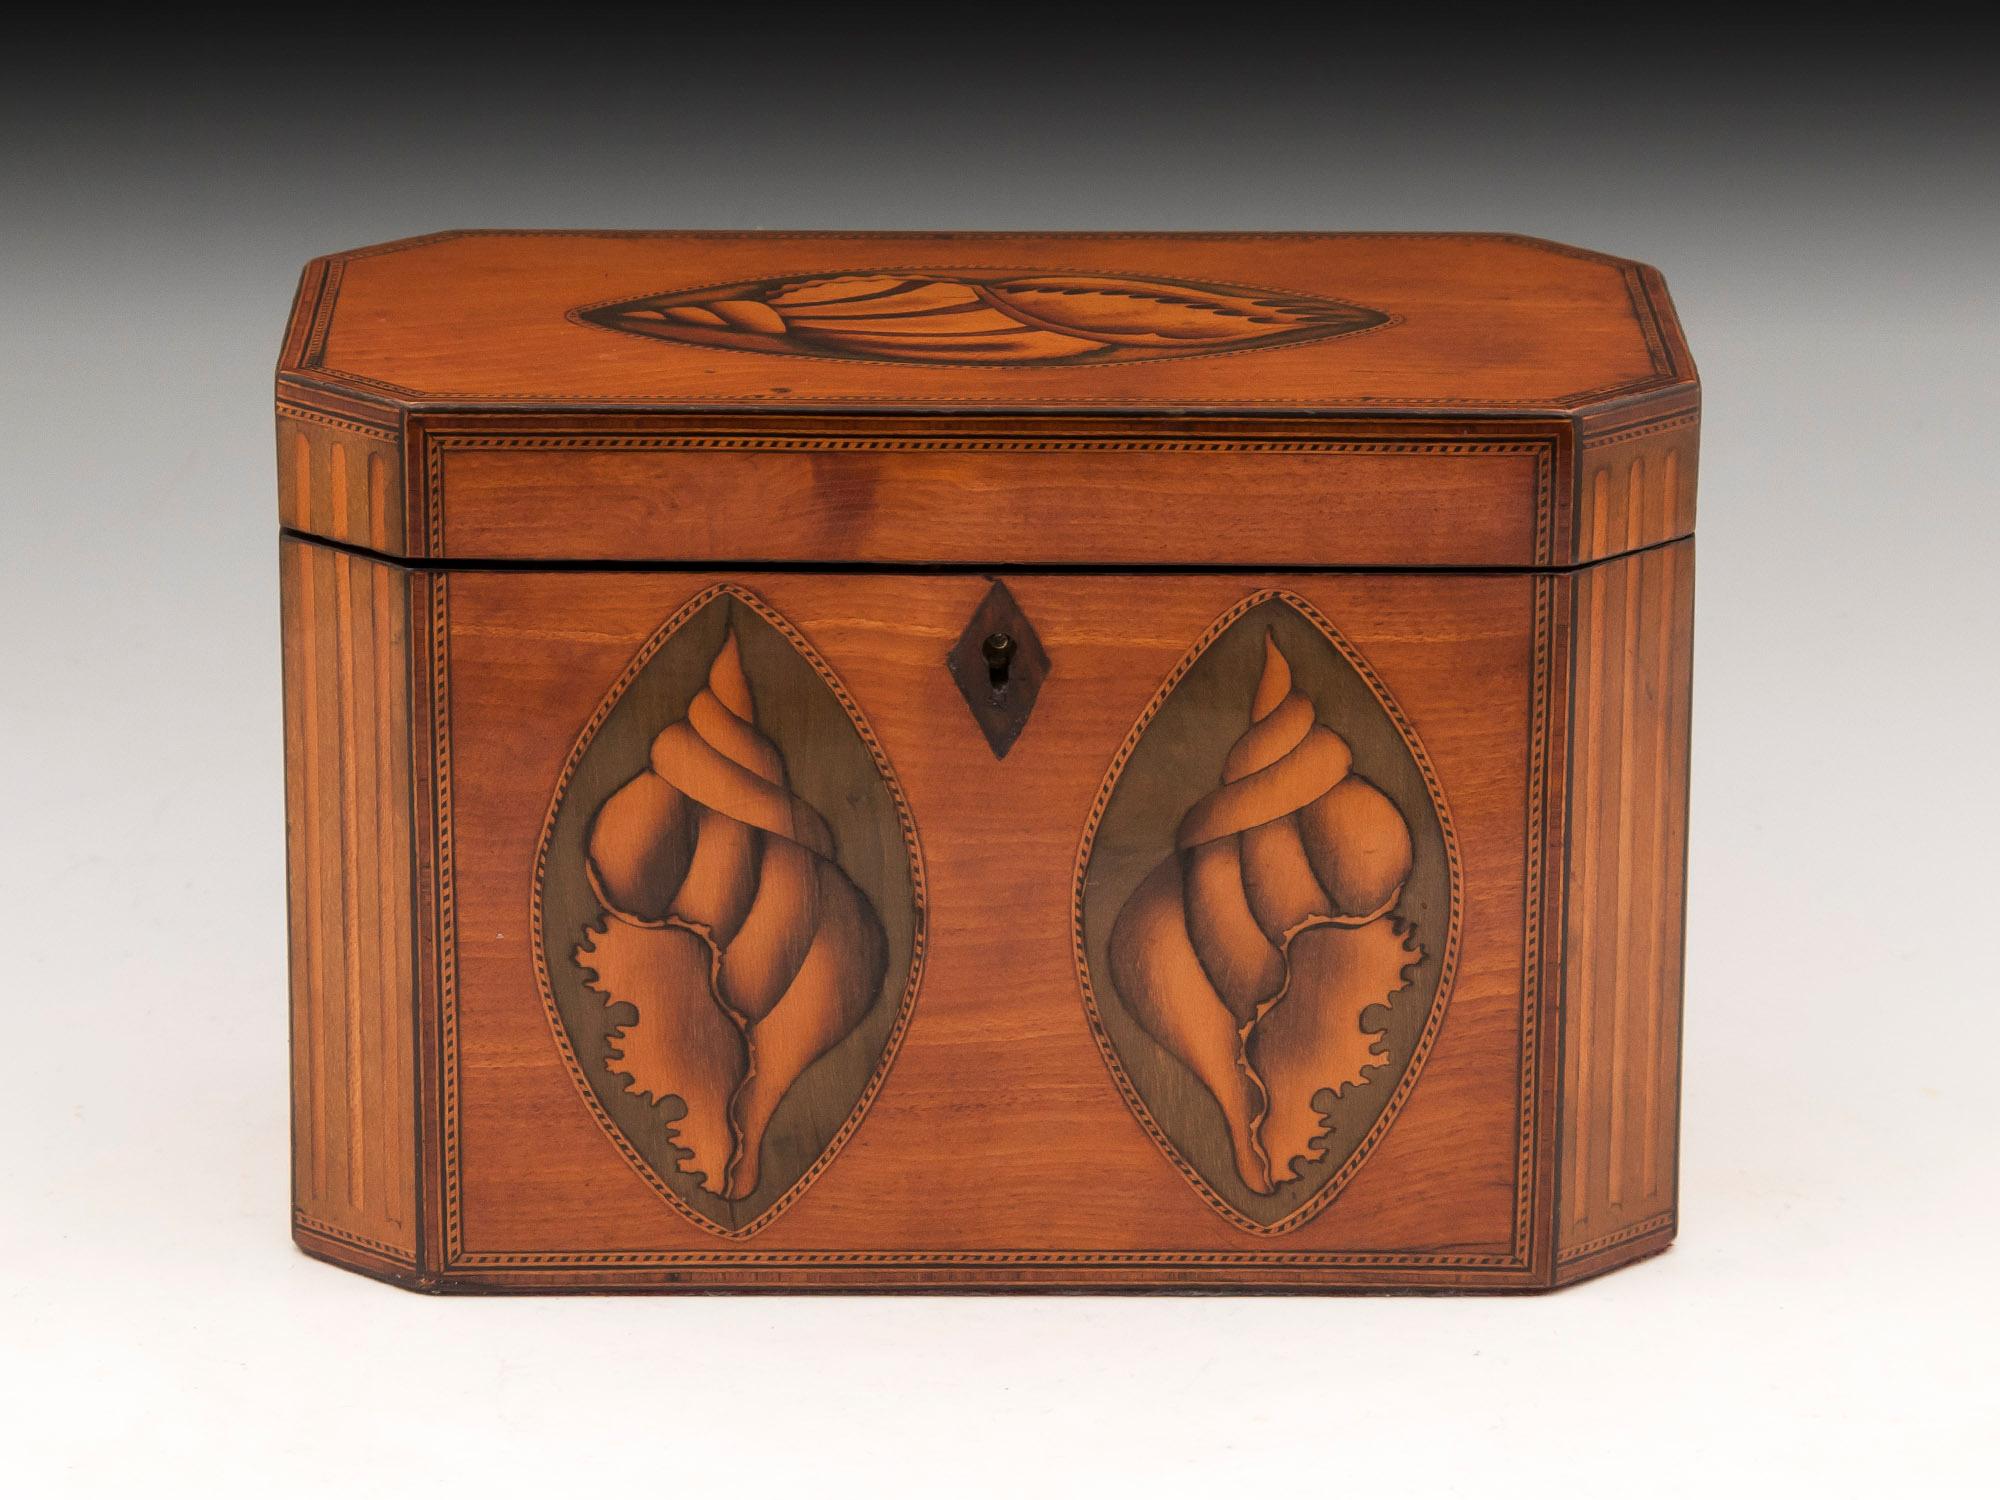 Georgian satinwood tea caddy with conch shells on the front and top, with fluted cants and diamond shape bone escutcheon.

The interior has two lidded compartments, the lids each with fan inlay and turned bone handles. The interior of each